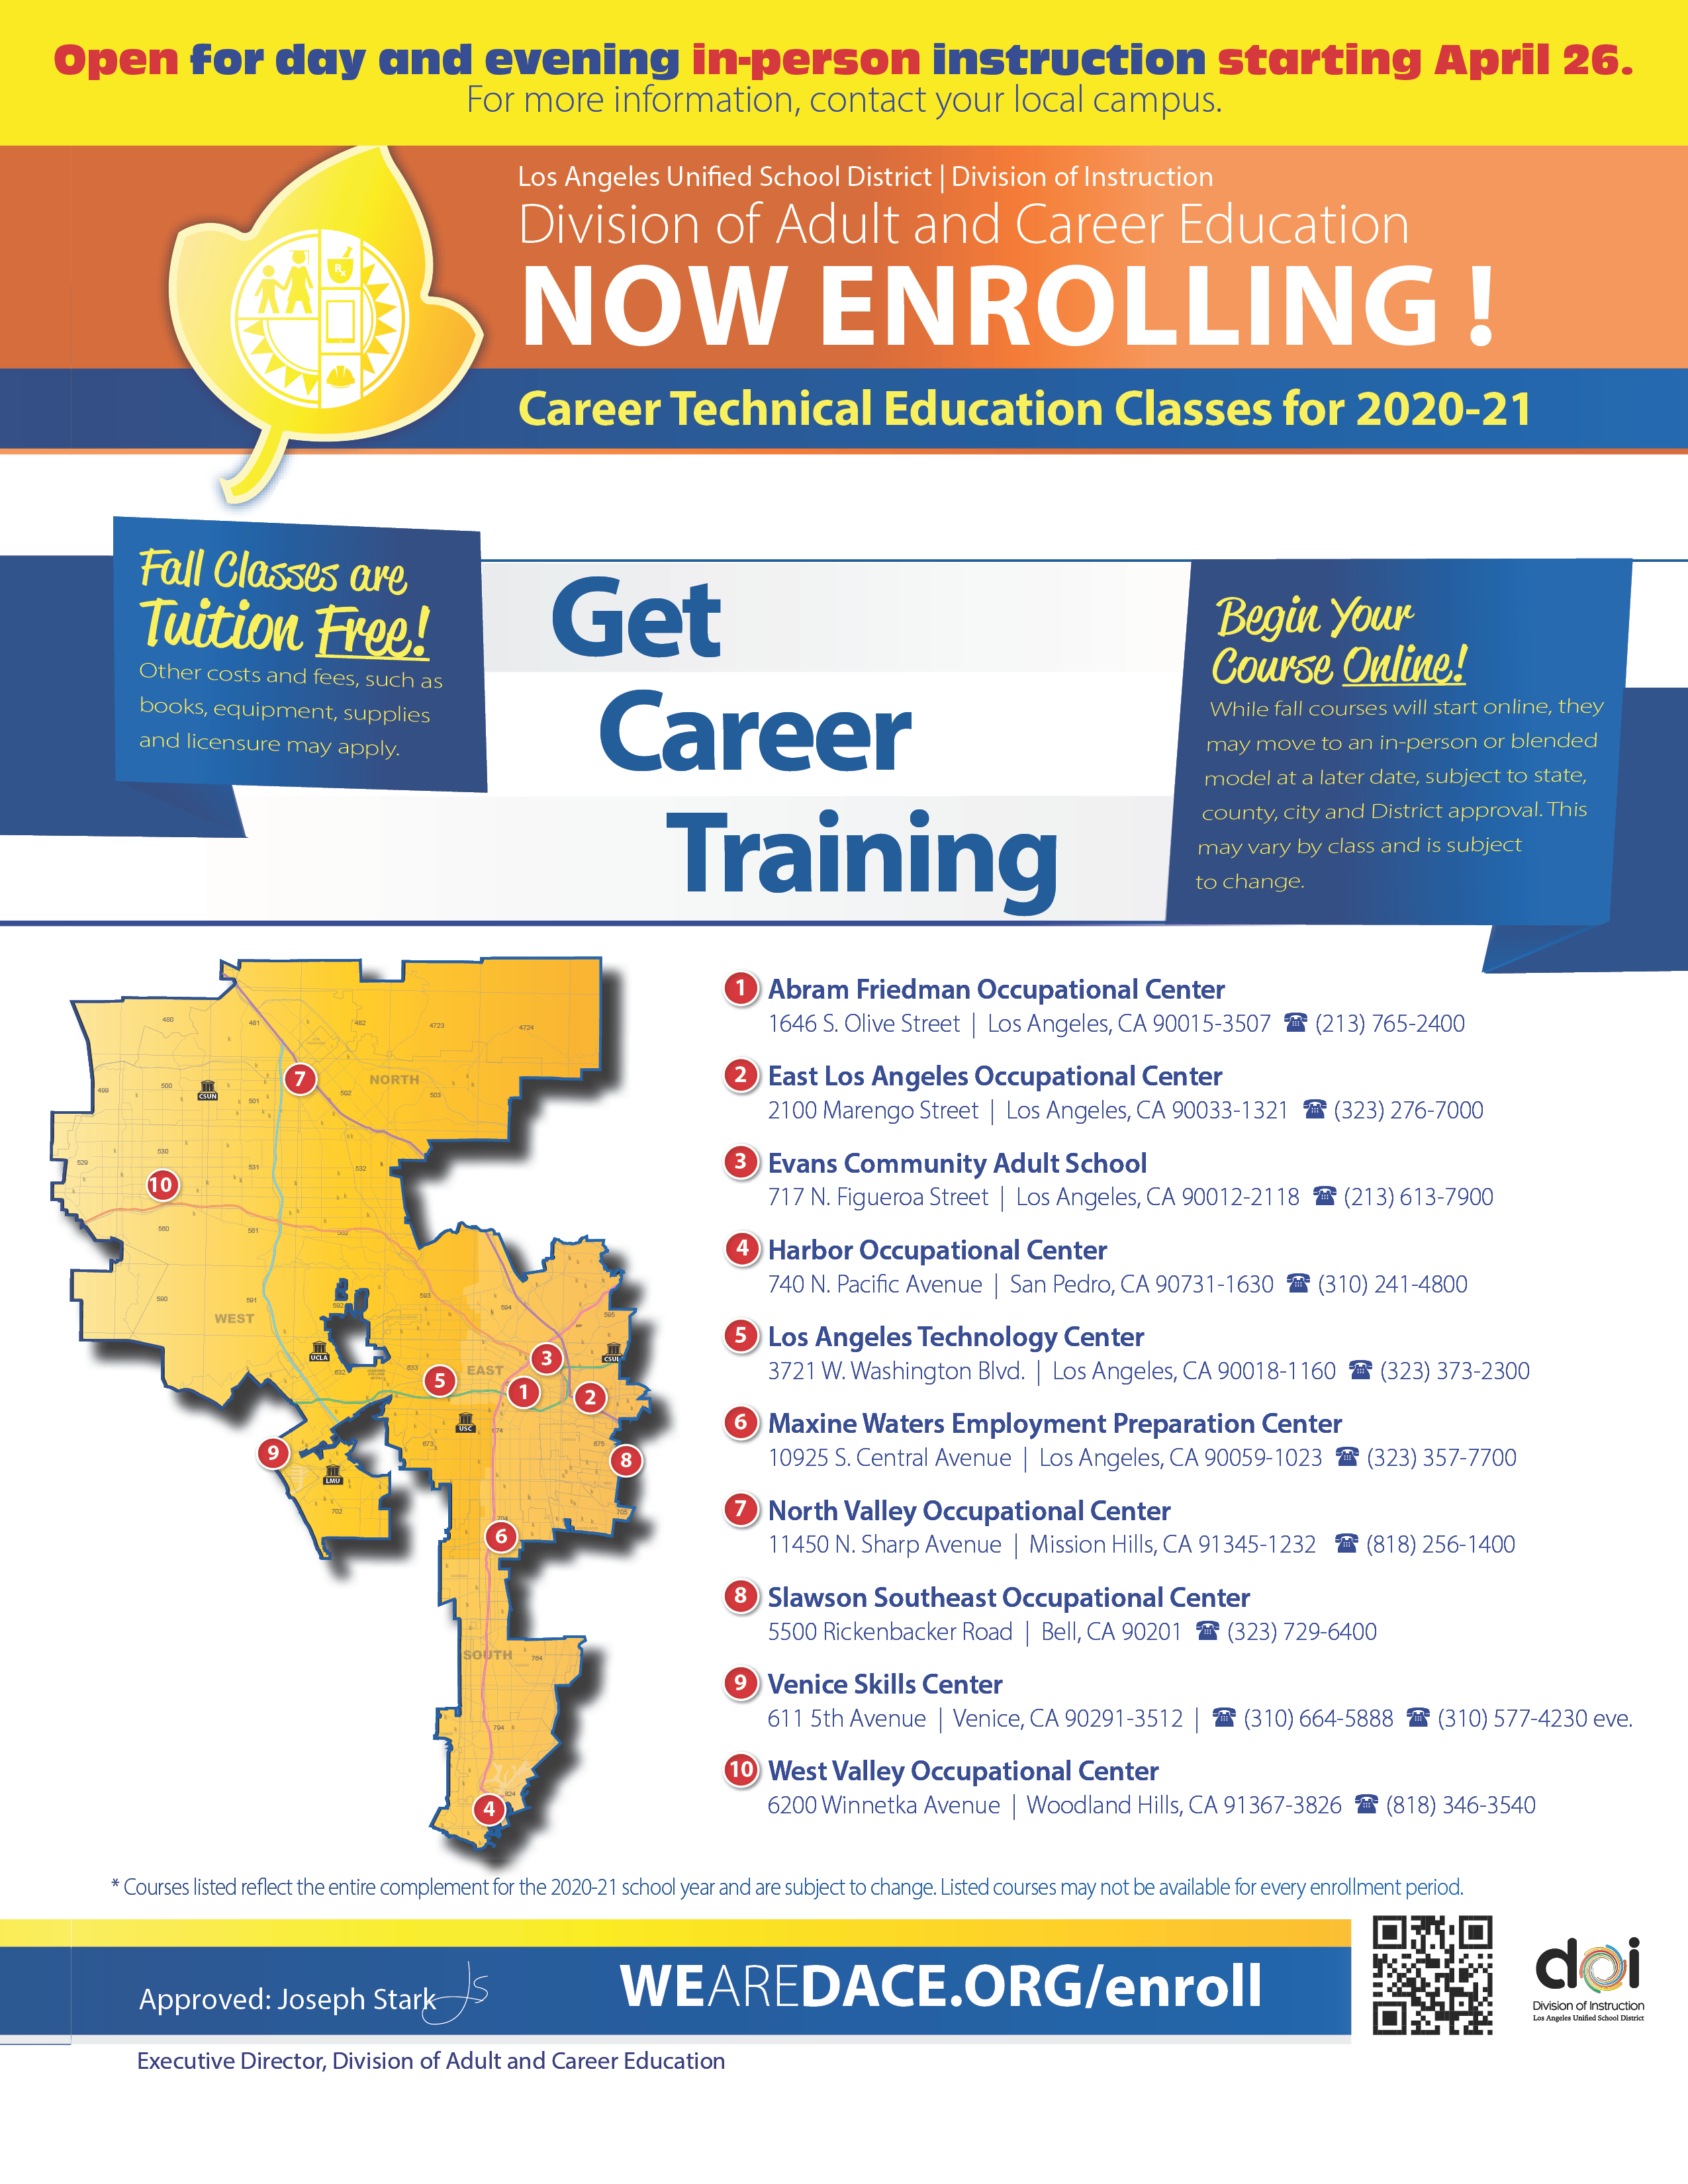 Train for a Career Flyer